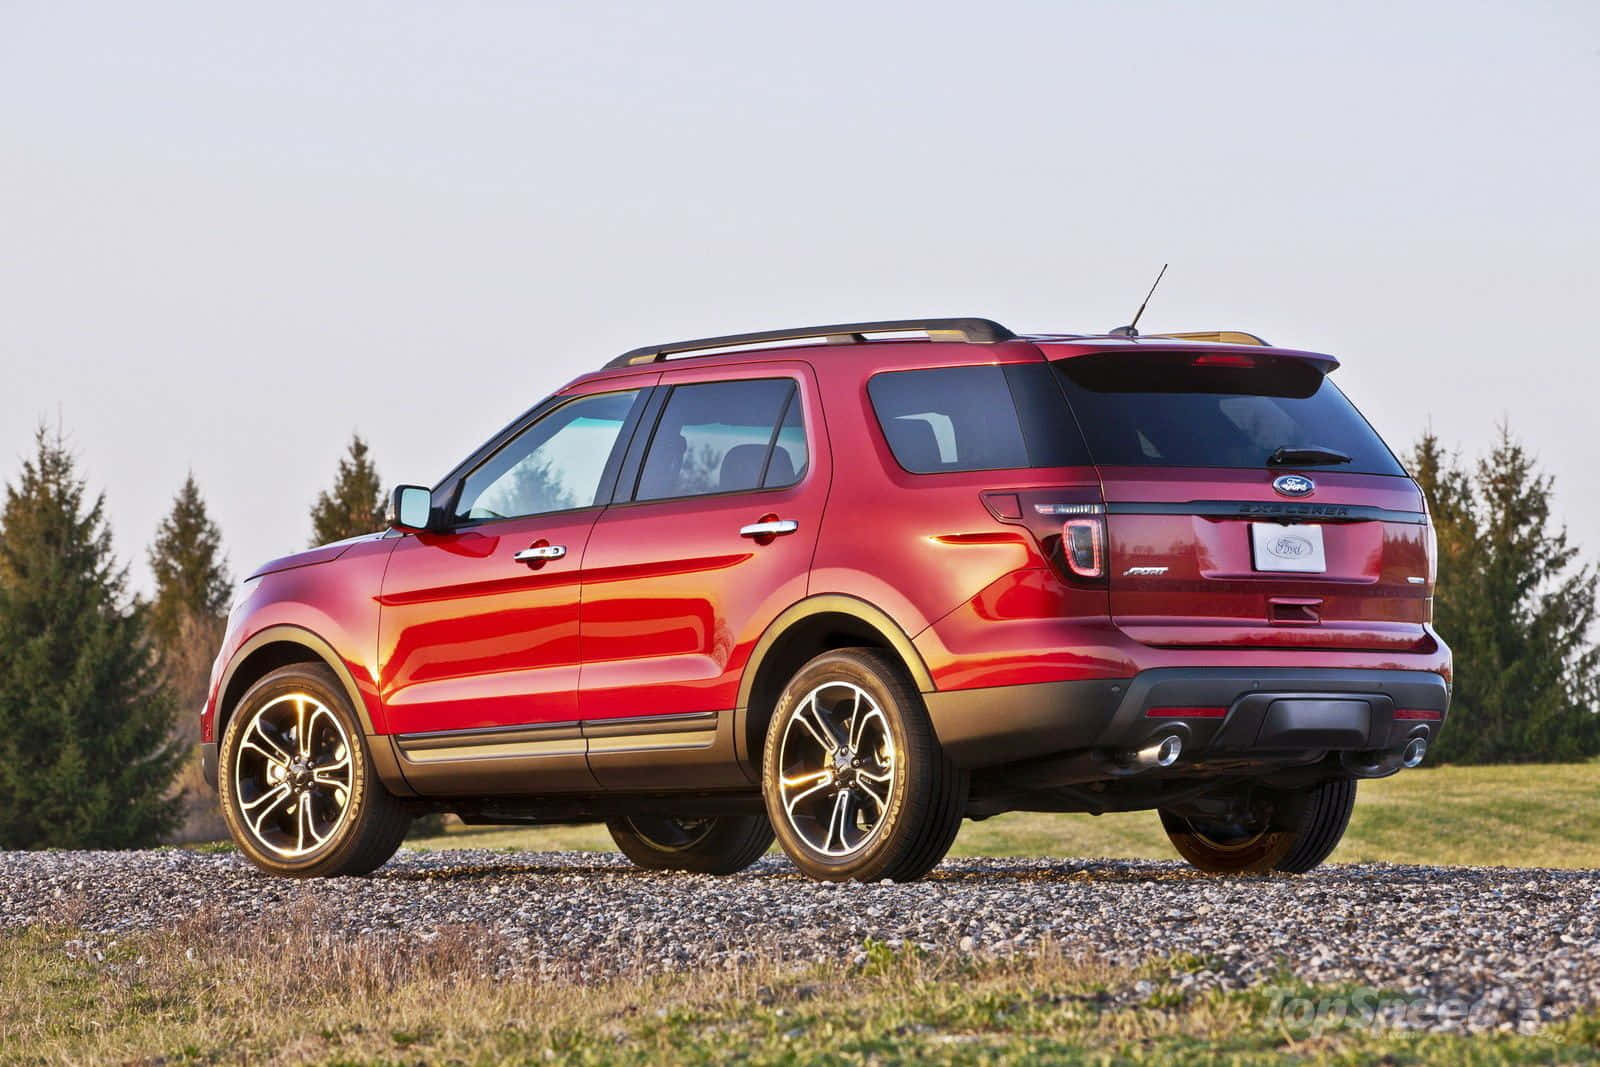 Sleek and Powerful Ford Explorer on the Road Wallpaper